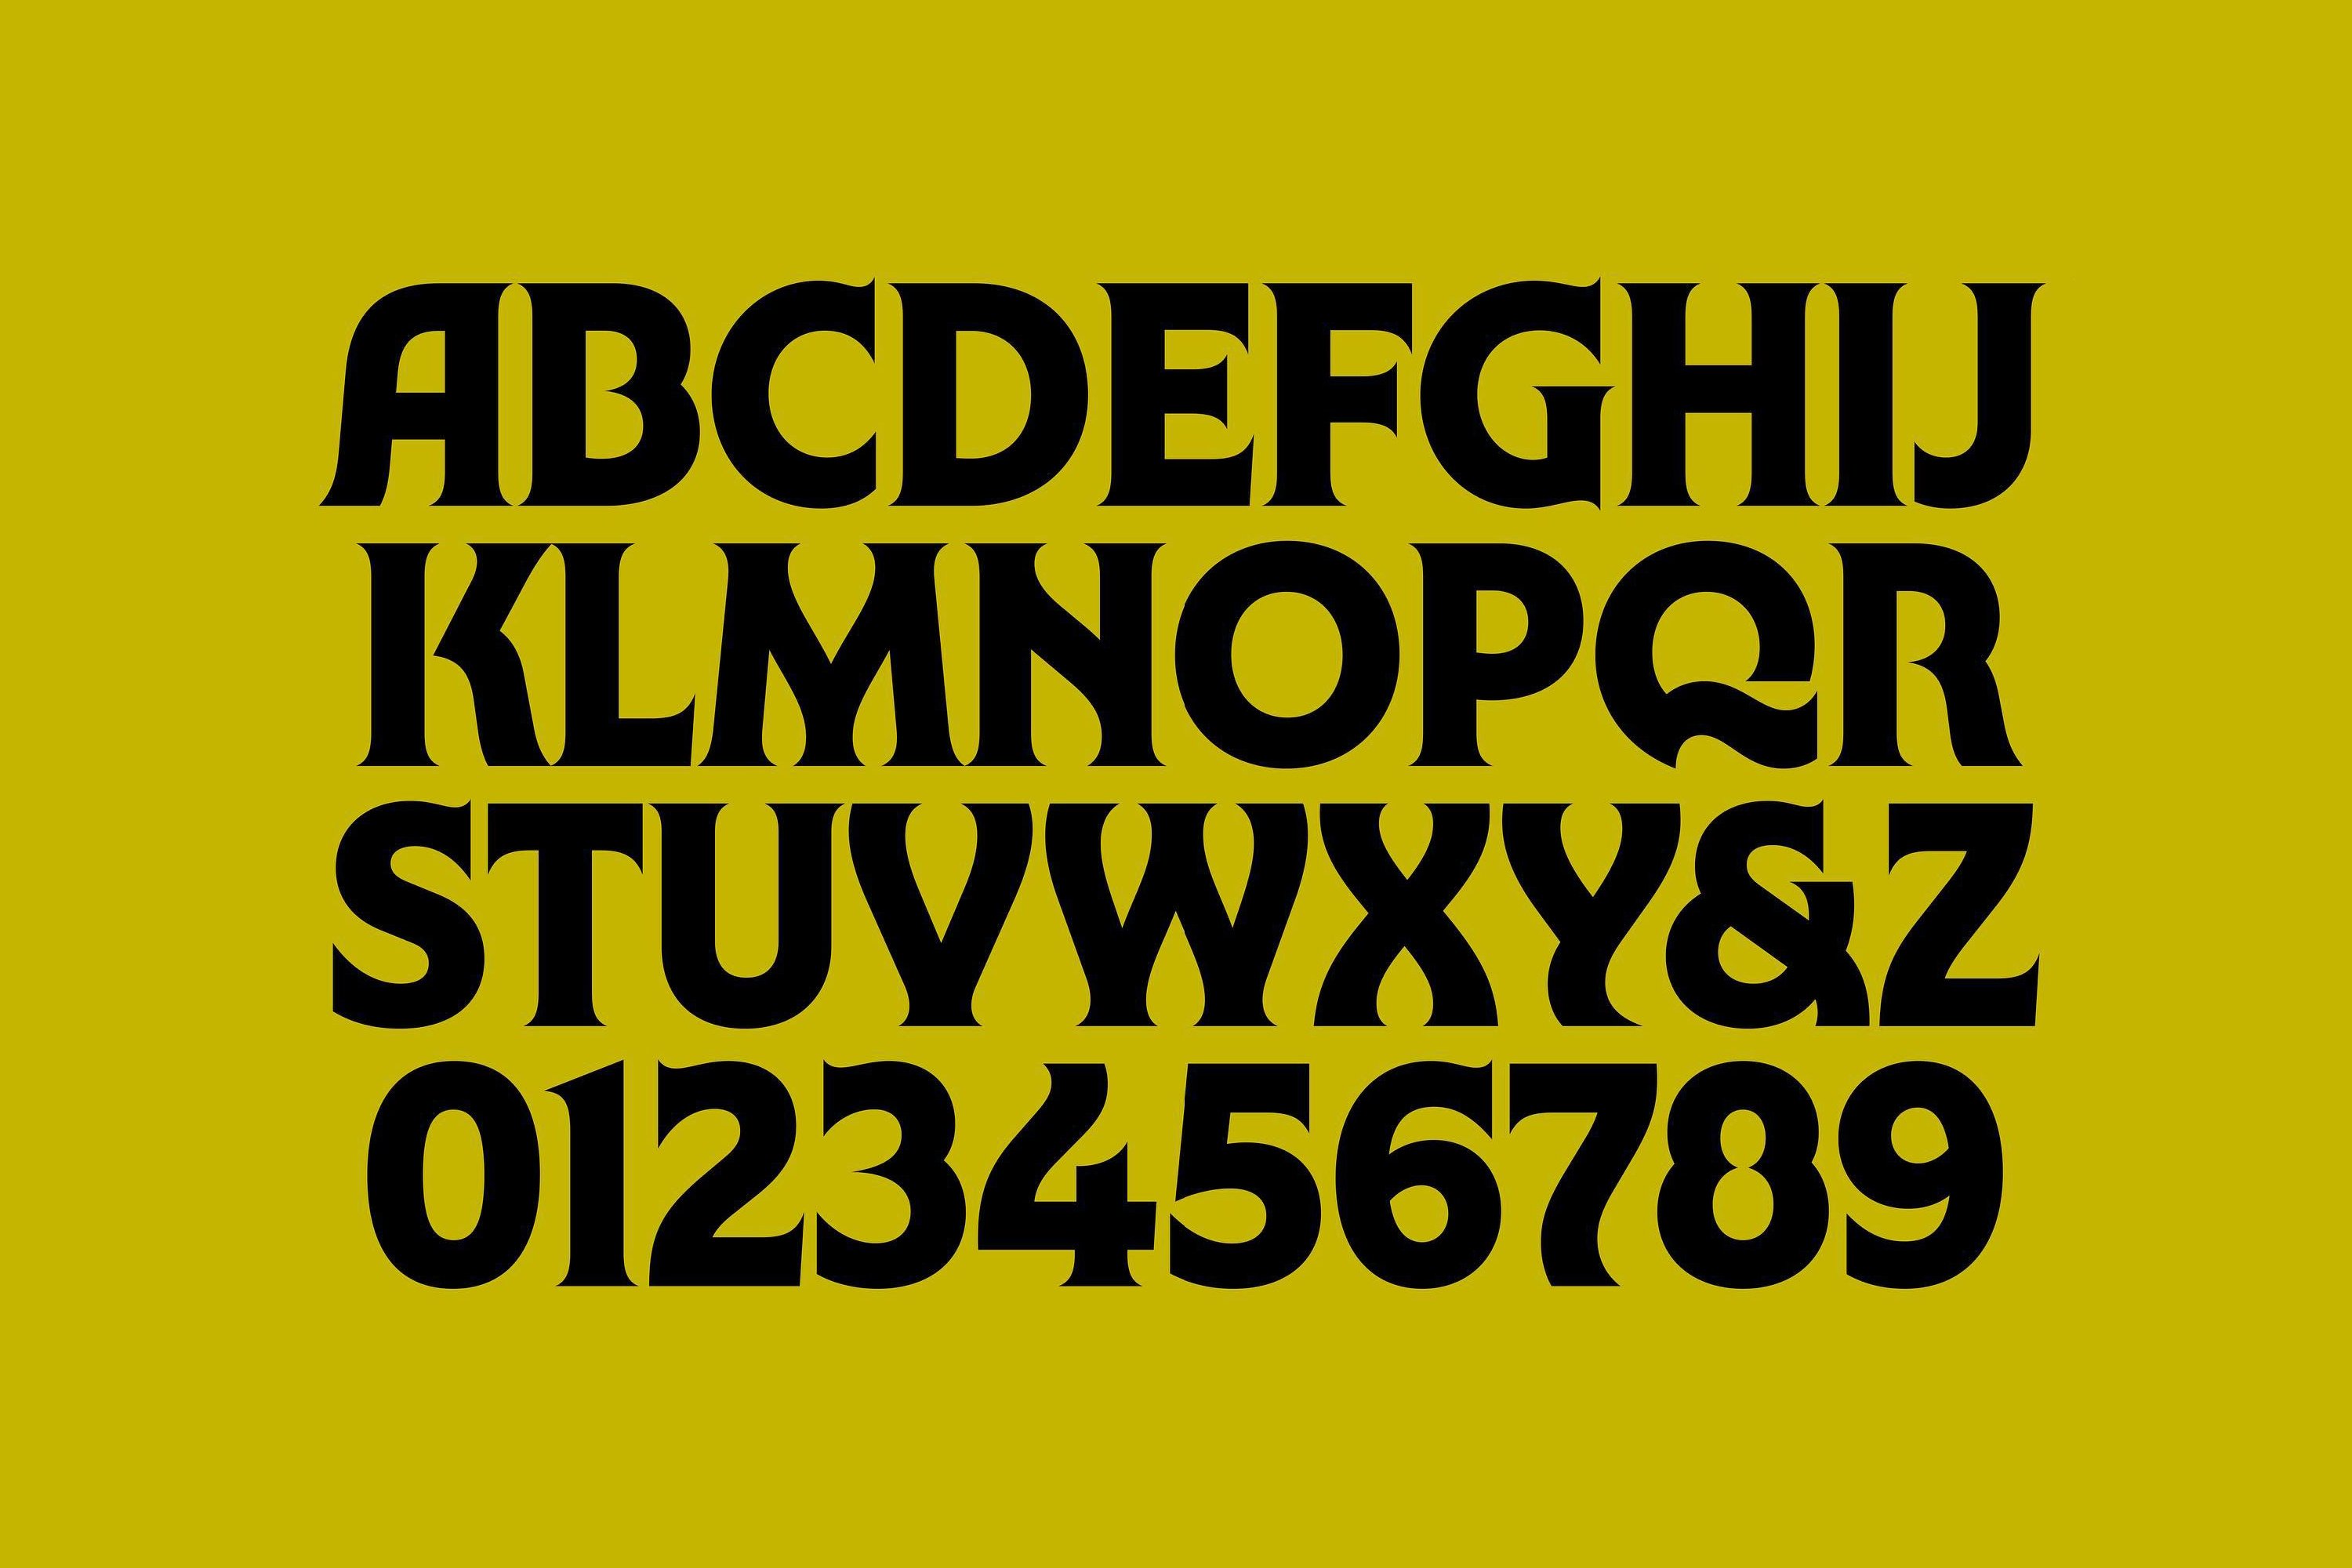 Custom typeface by Wolff Olins and Ryan Bugden for New York Botanical Garden